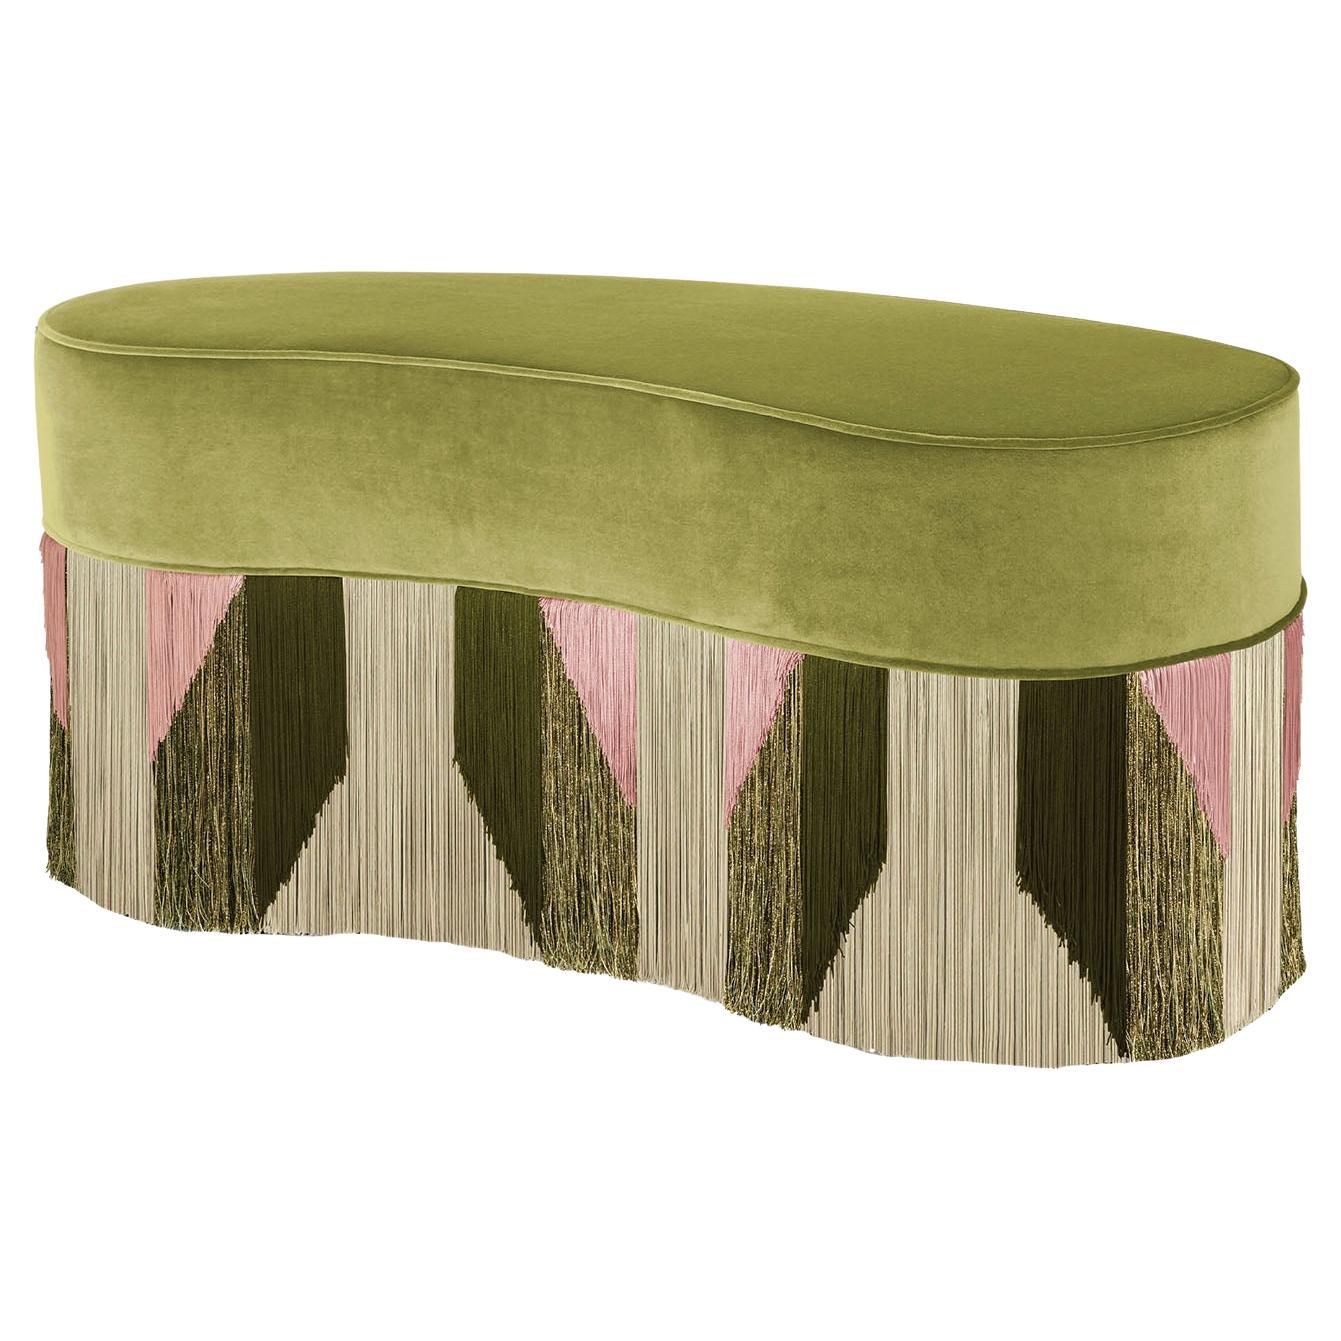 Tribe Green Bean Bench by Lorenza Bozzoli For Sale